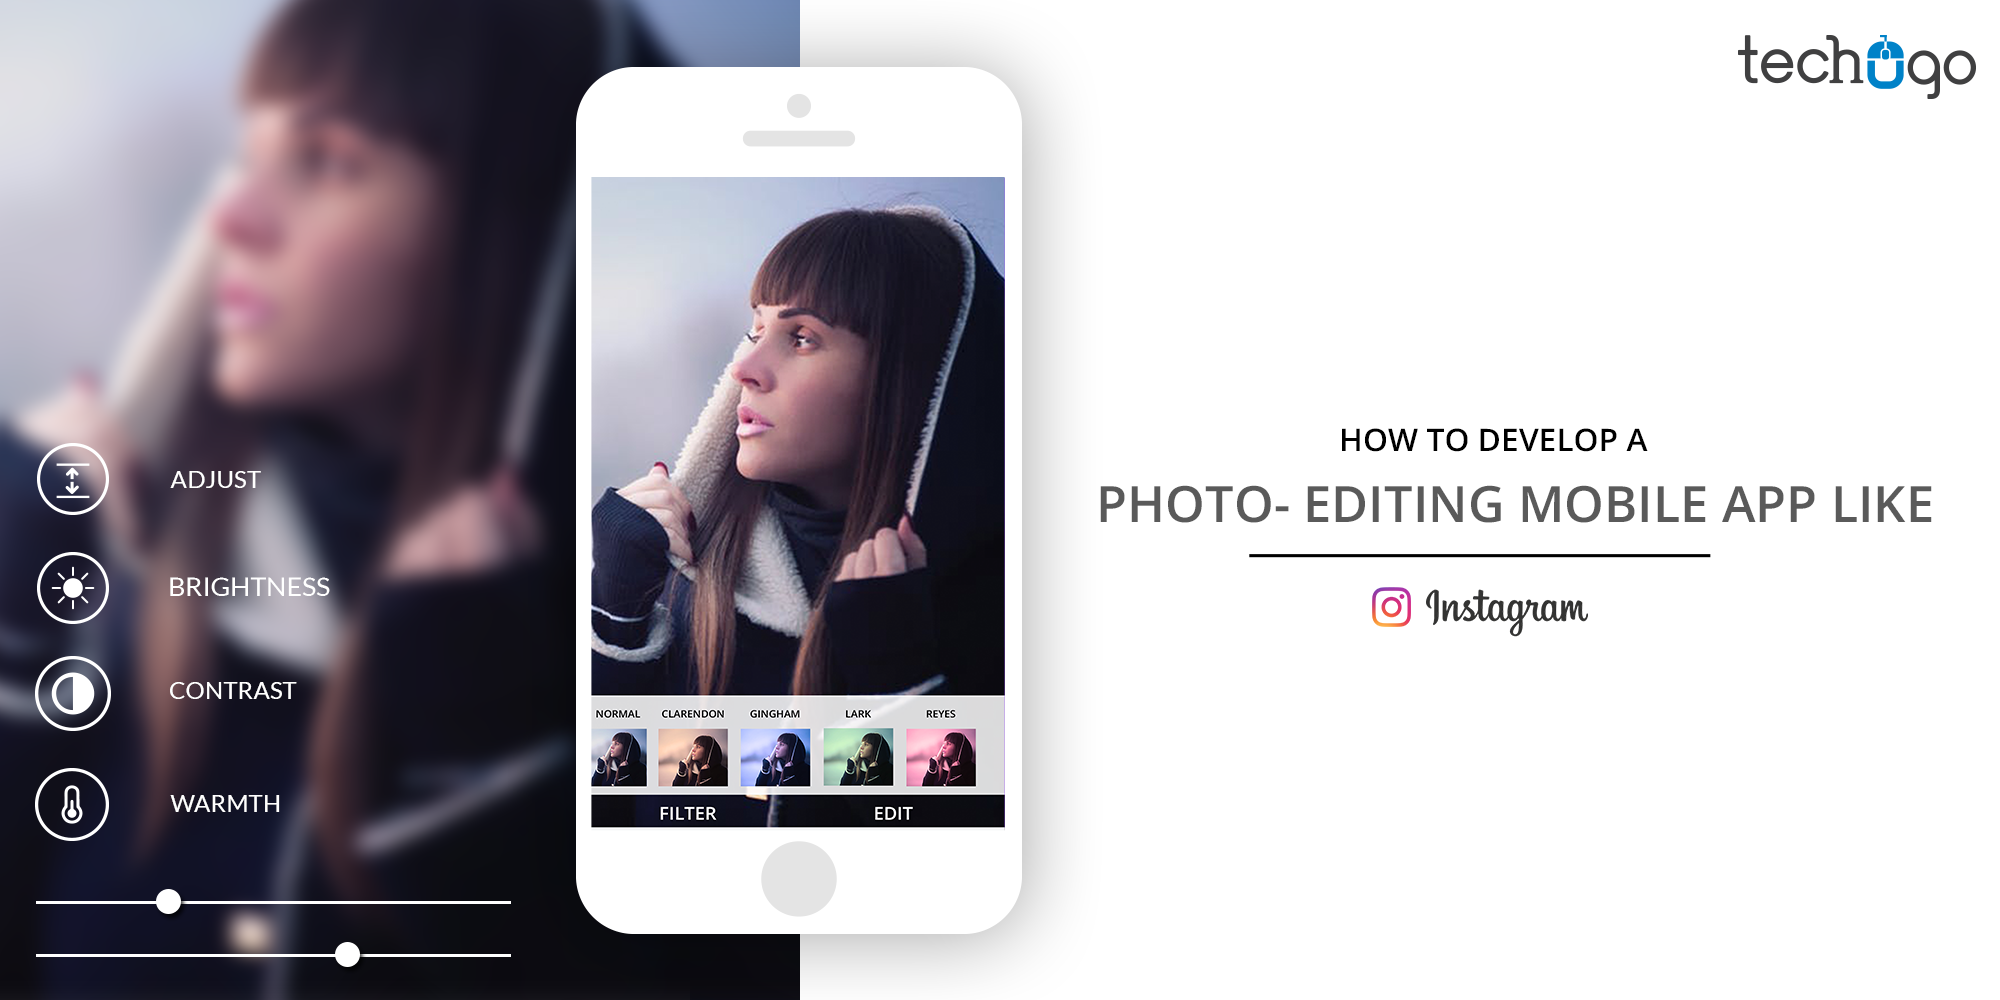 How To Develop A Photo- Editing Mobile App Like Instagram